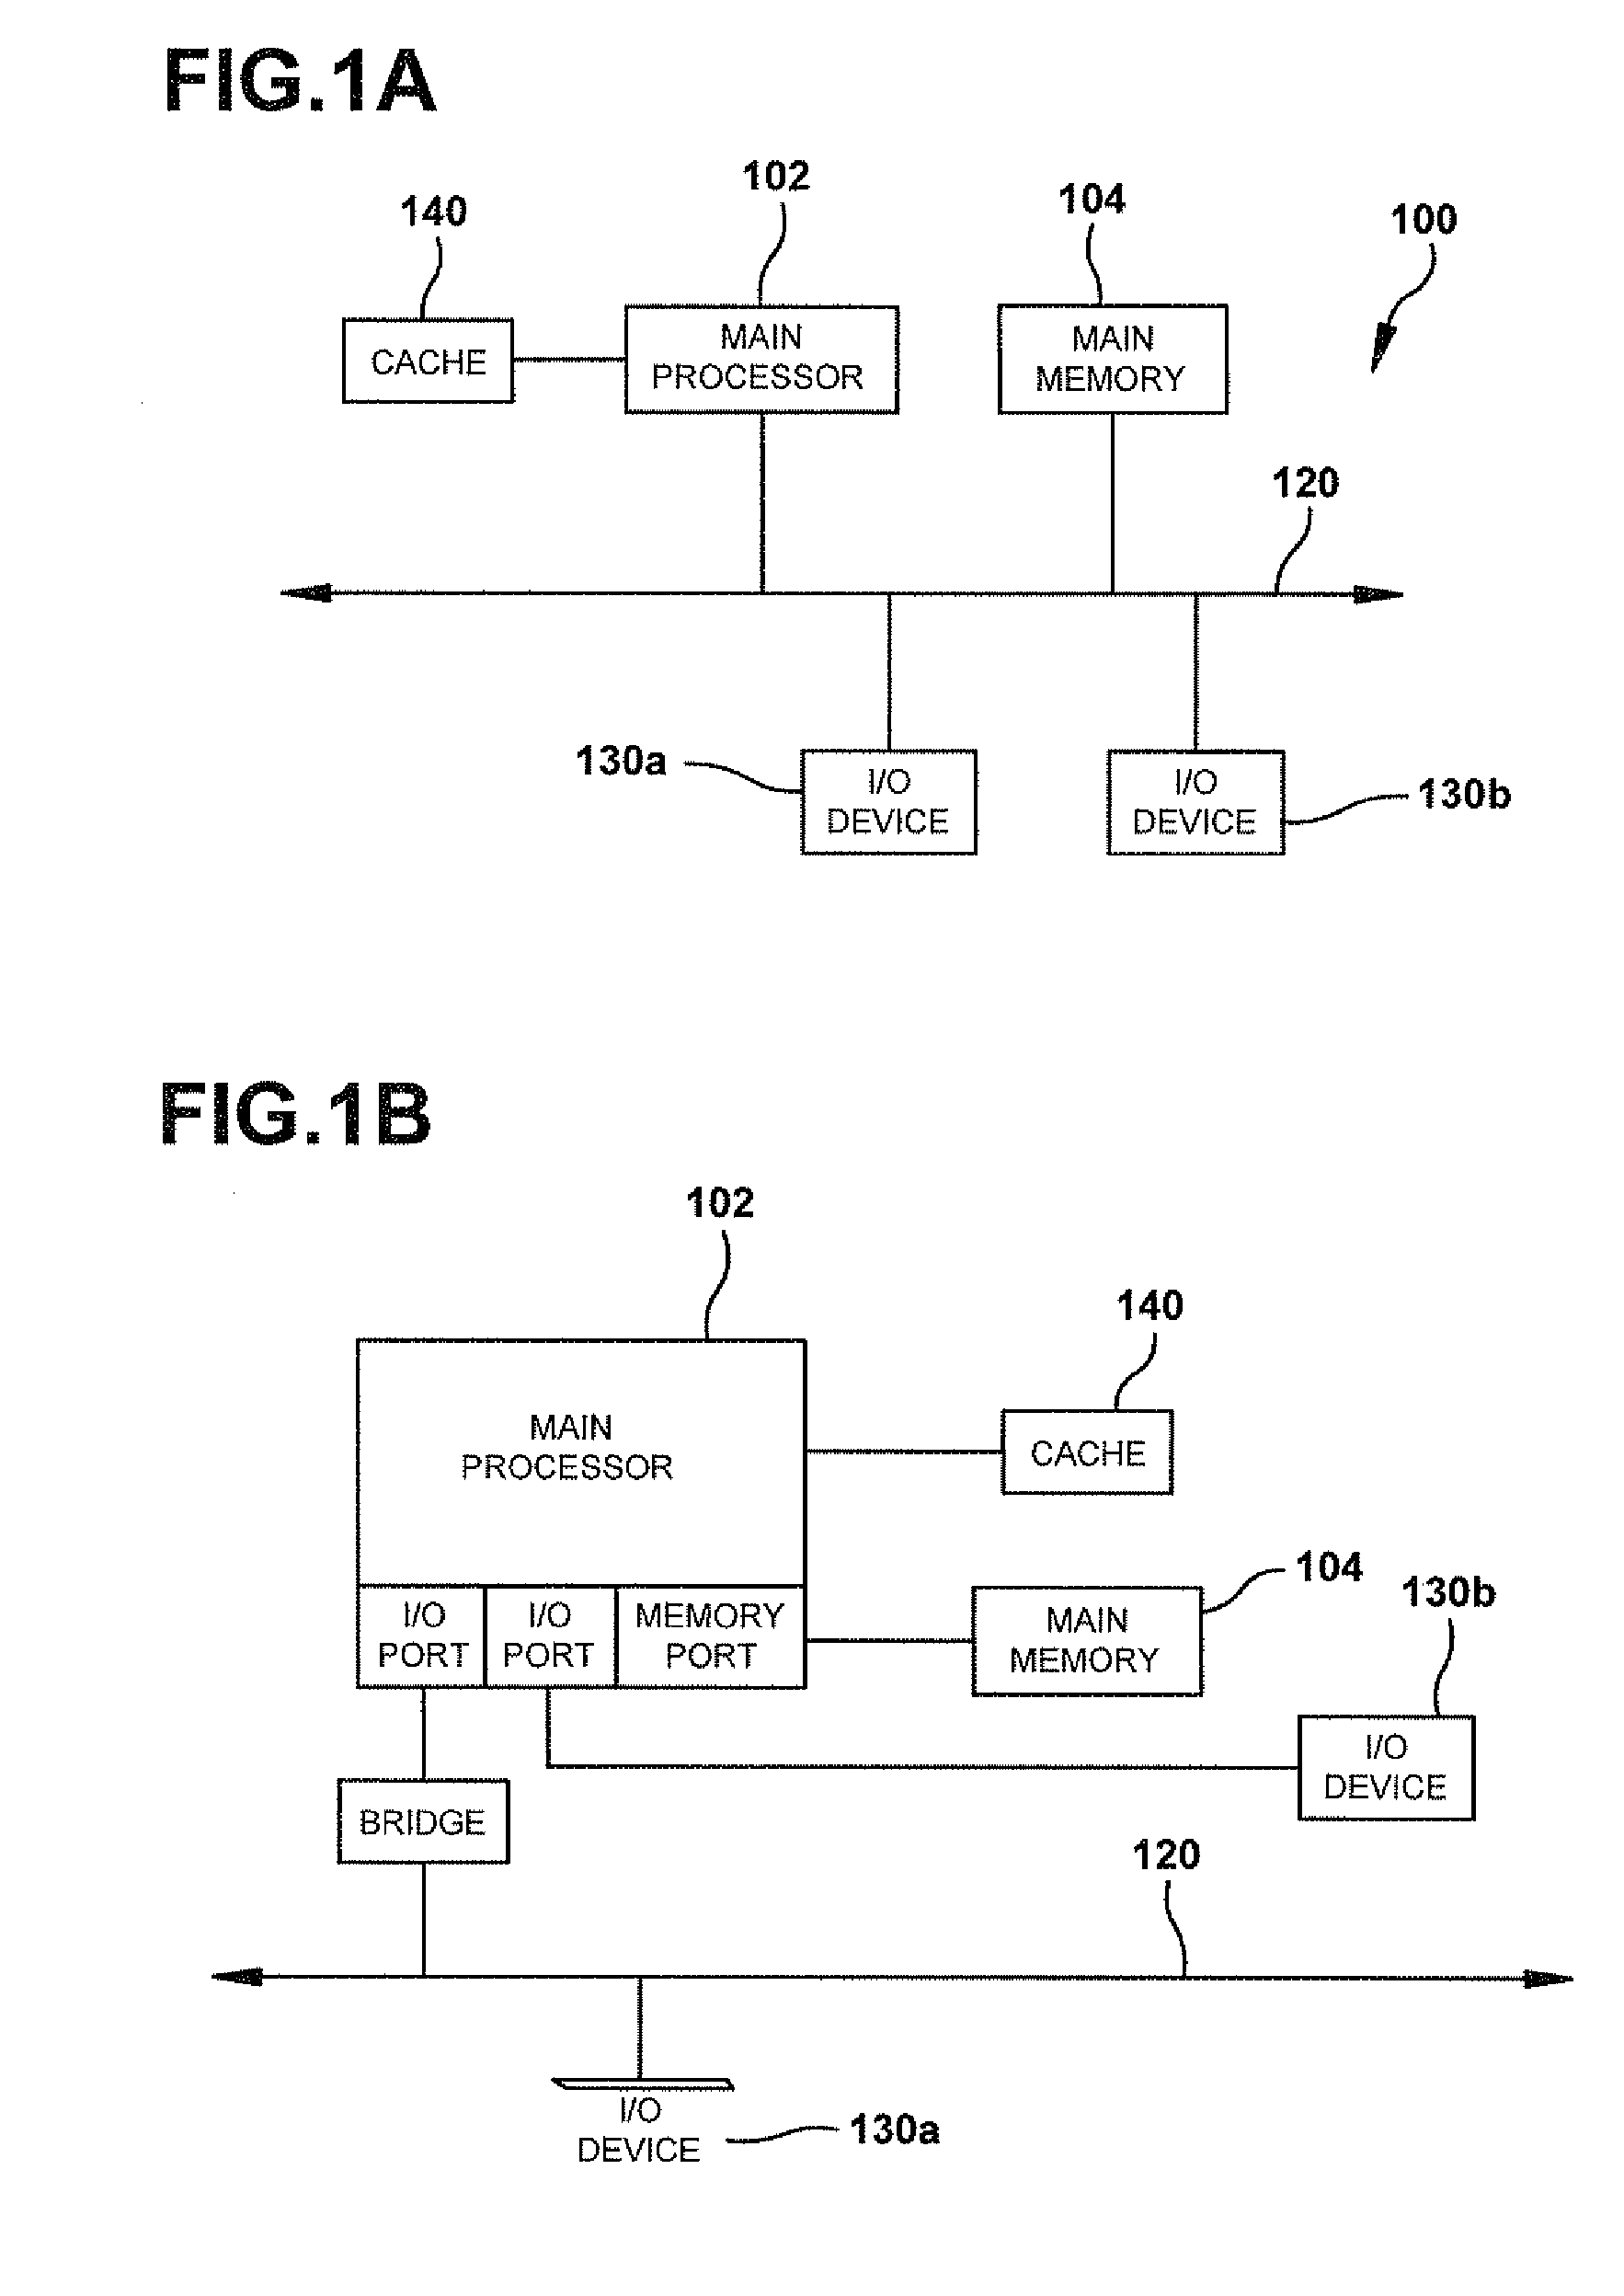 Methods and systems for assigning access control levels in providing access to resources via virtual machines